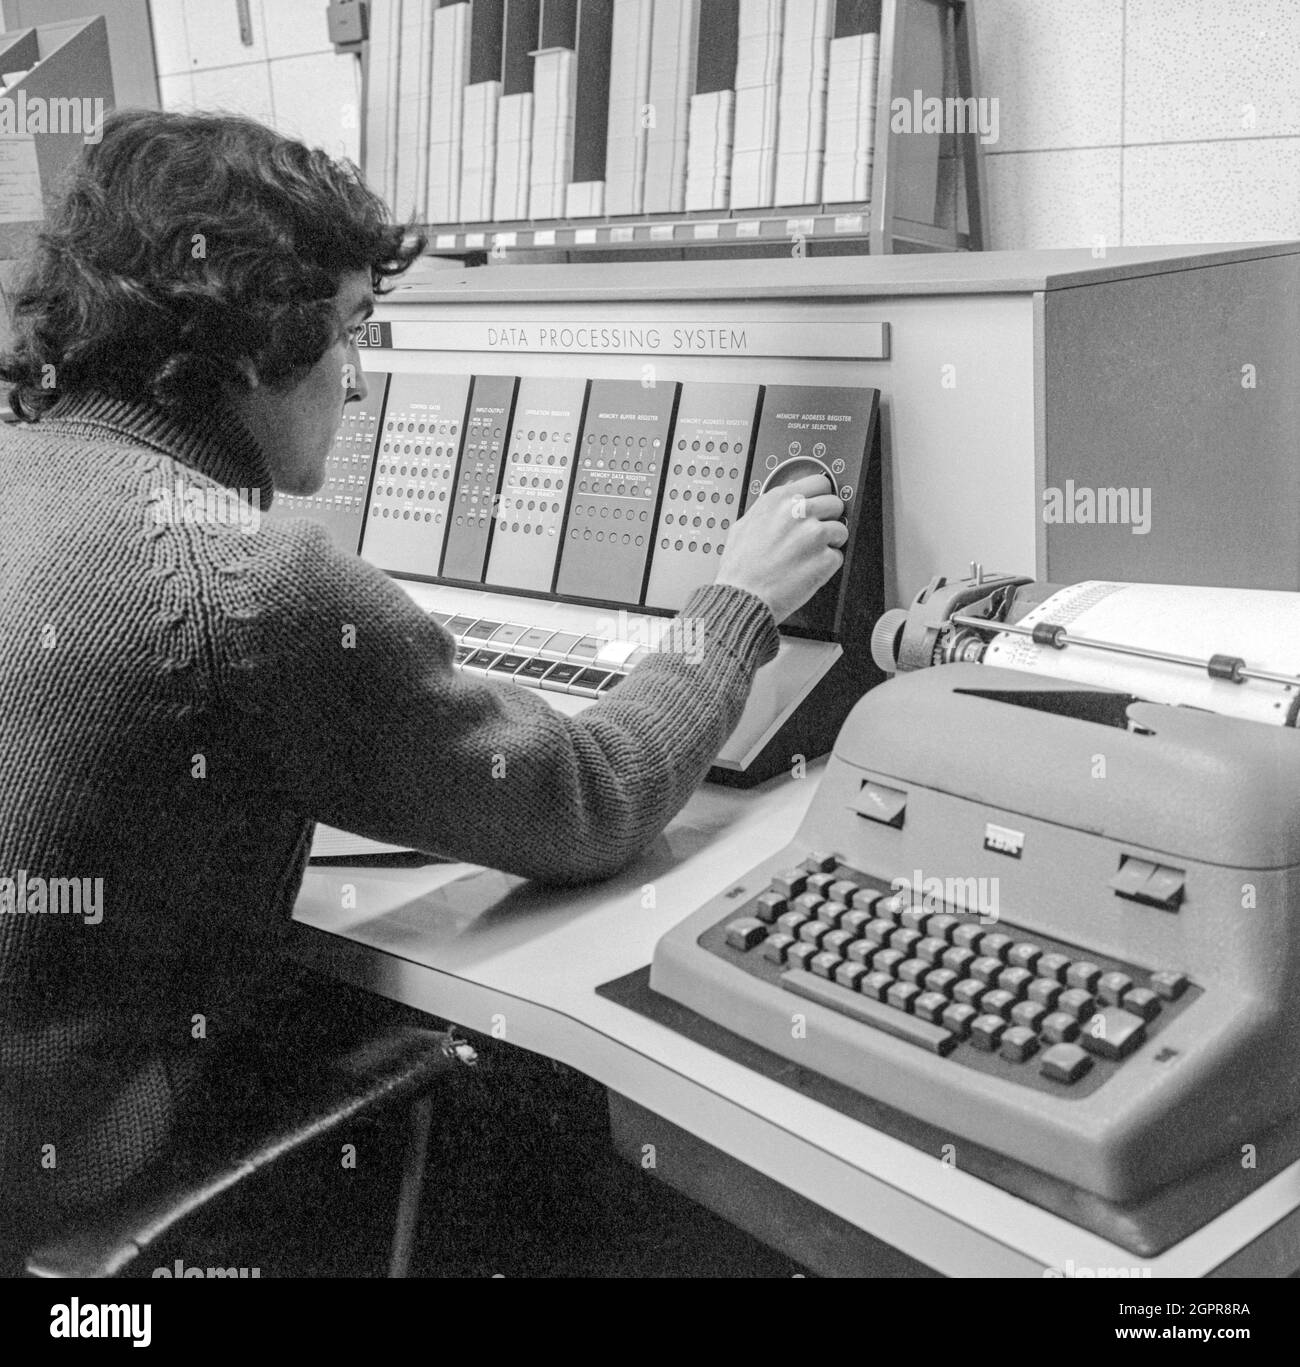 A student at Regent Street Polytechnic (now the University of Westminster) using an IBM 1620 Data Processing System in 1970. Stock Photo